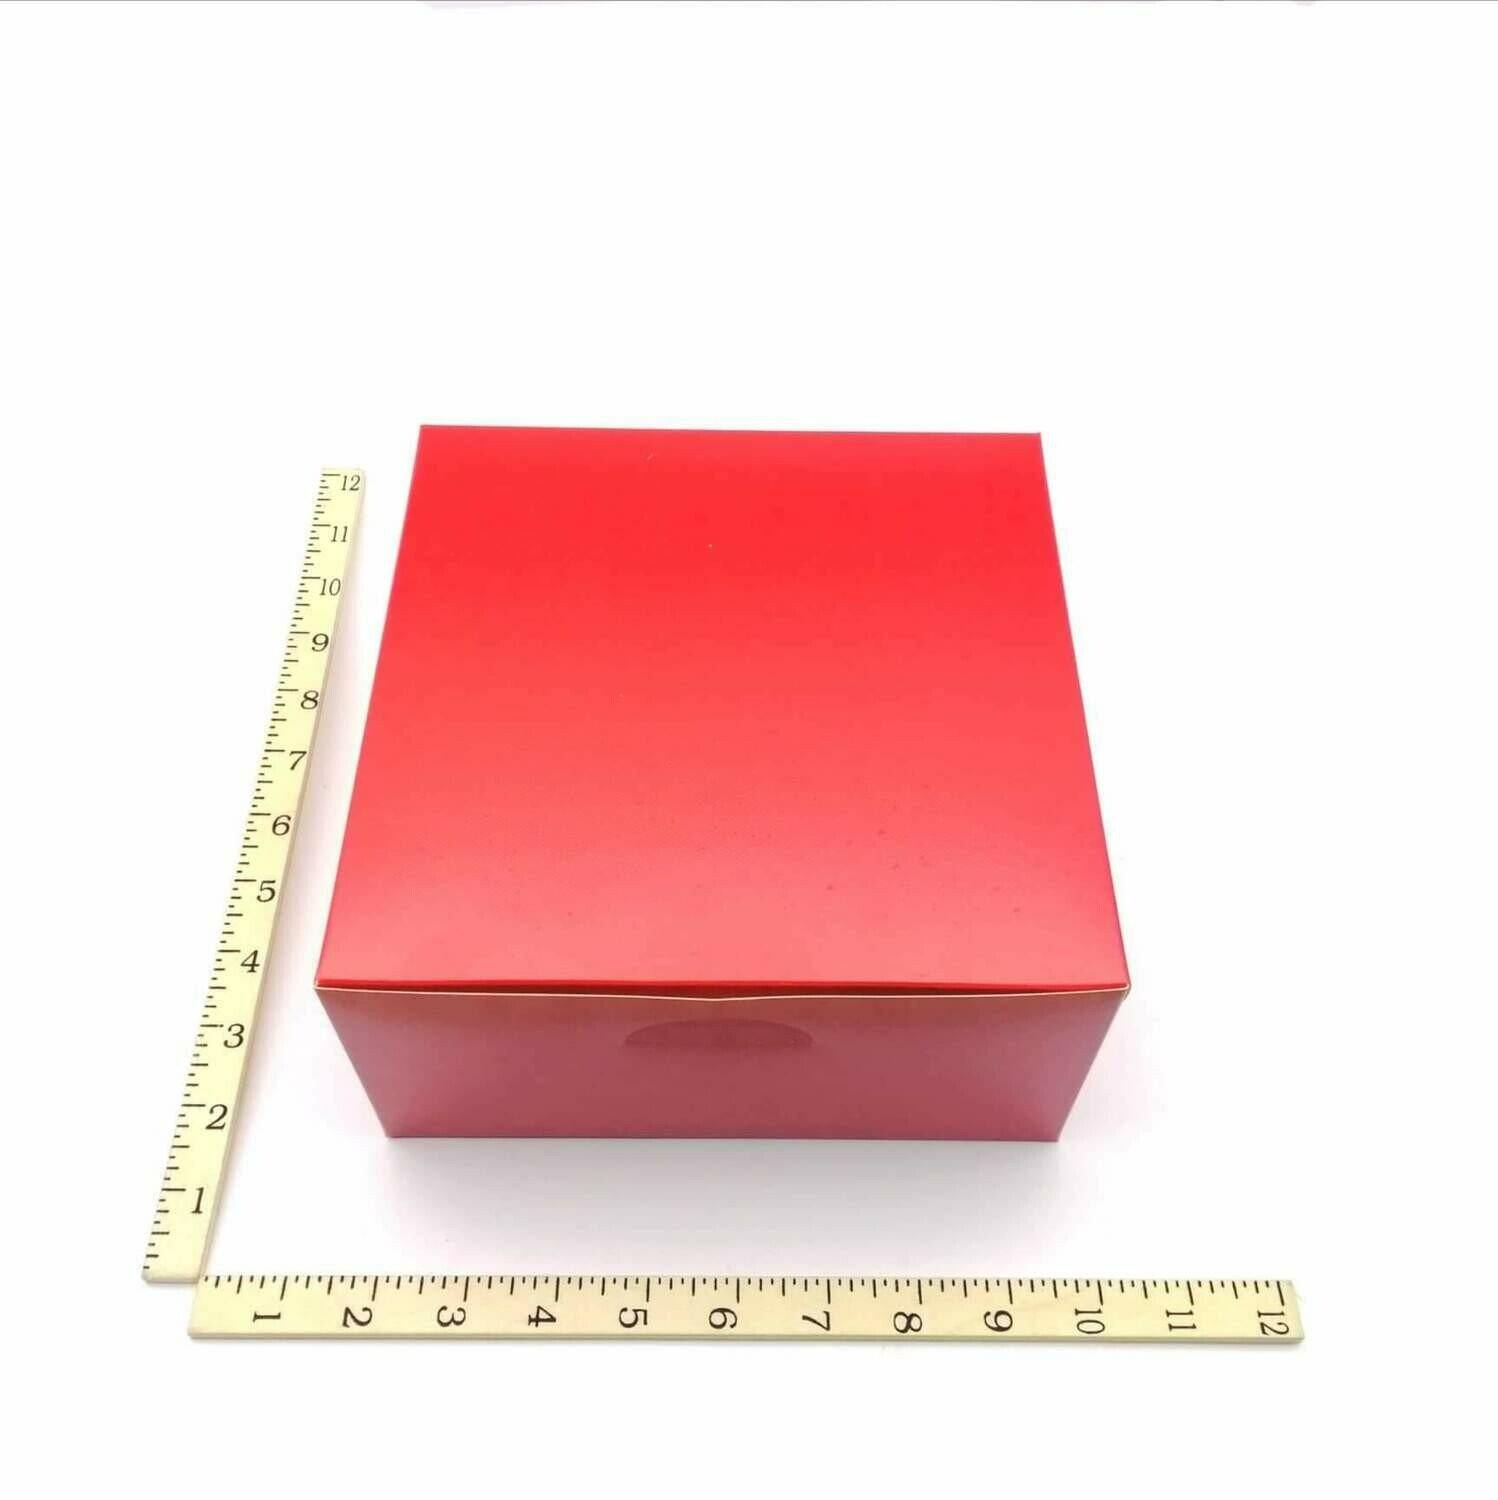 8 X 8 X 4 ALL RED 20'S - Kitchen Convenience: Ingredients & Supplies Delivery